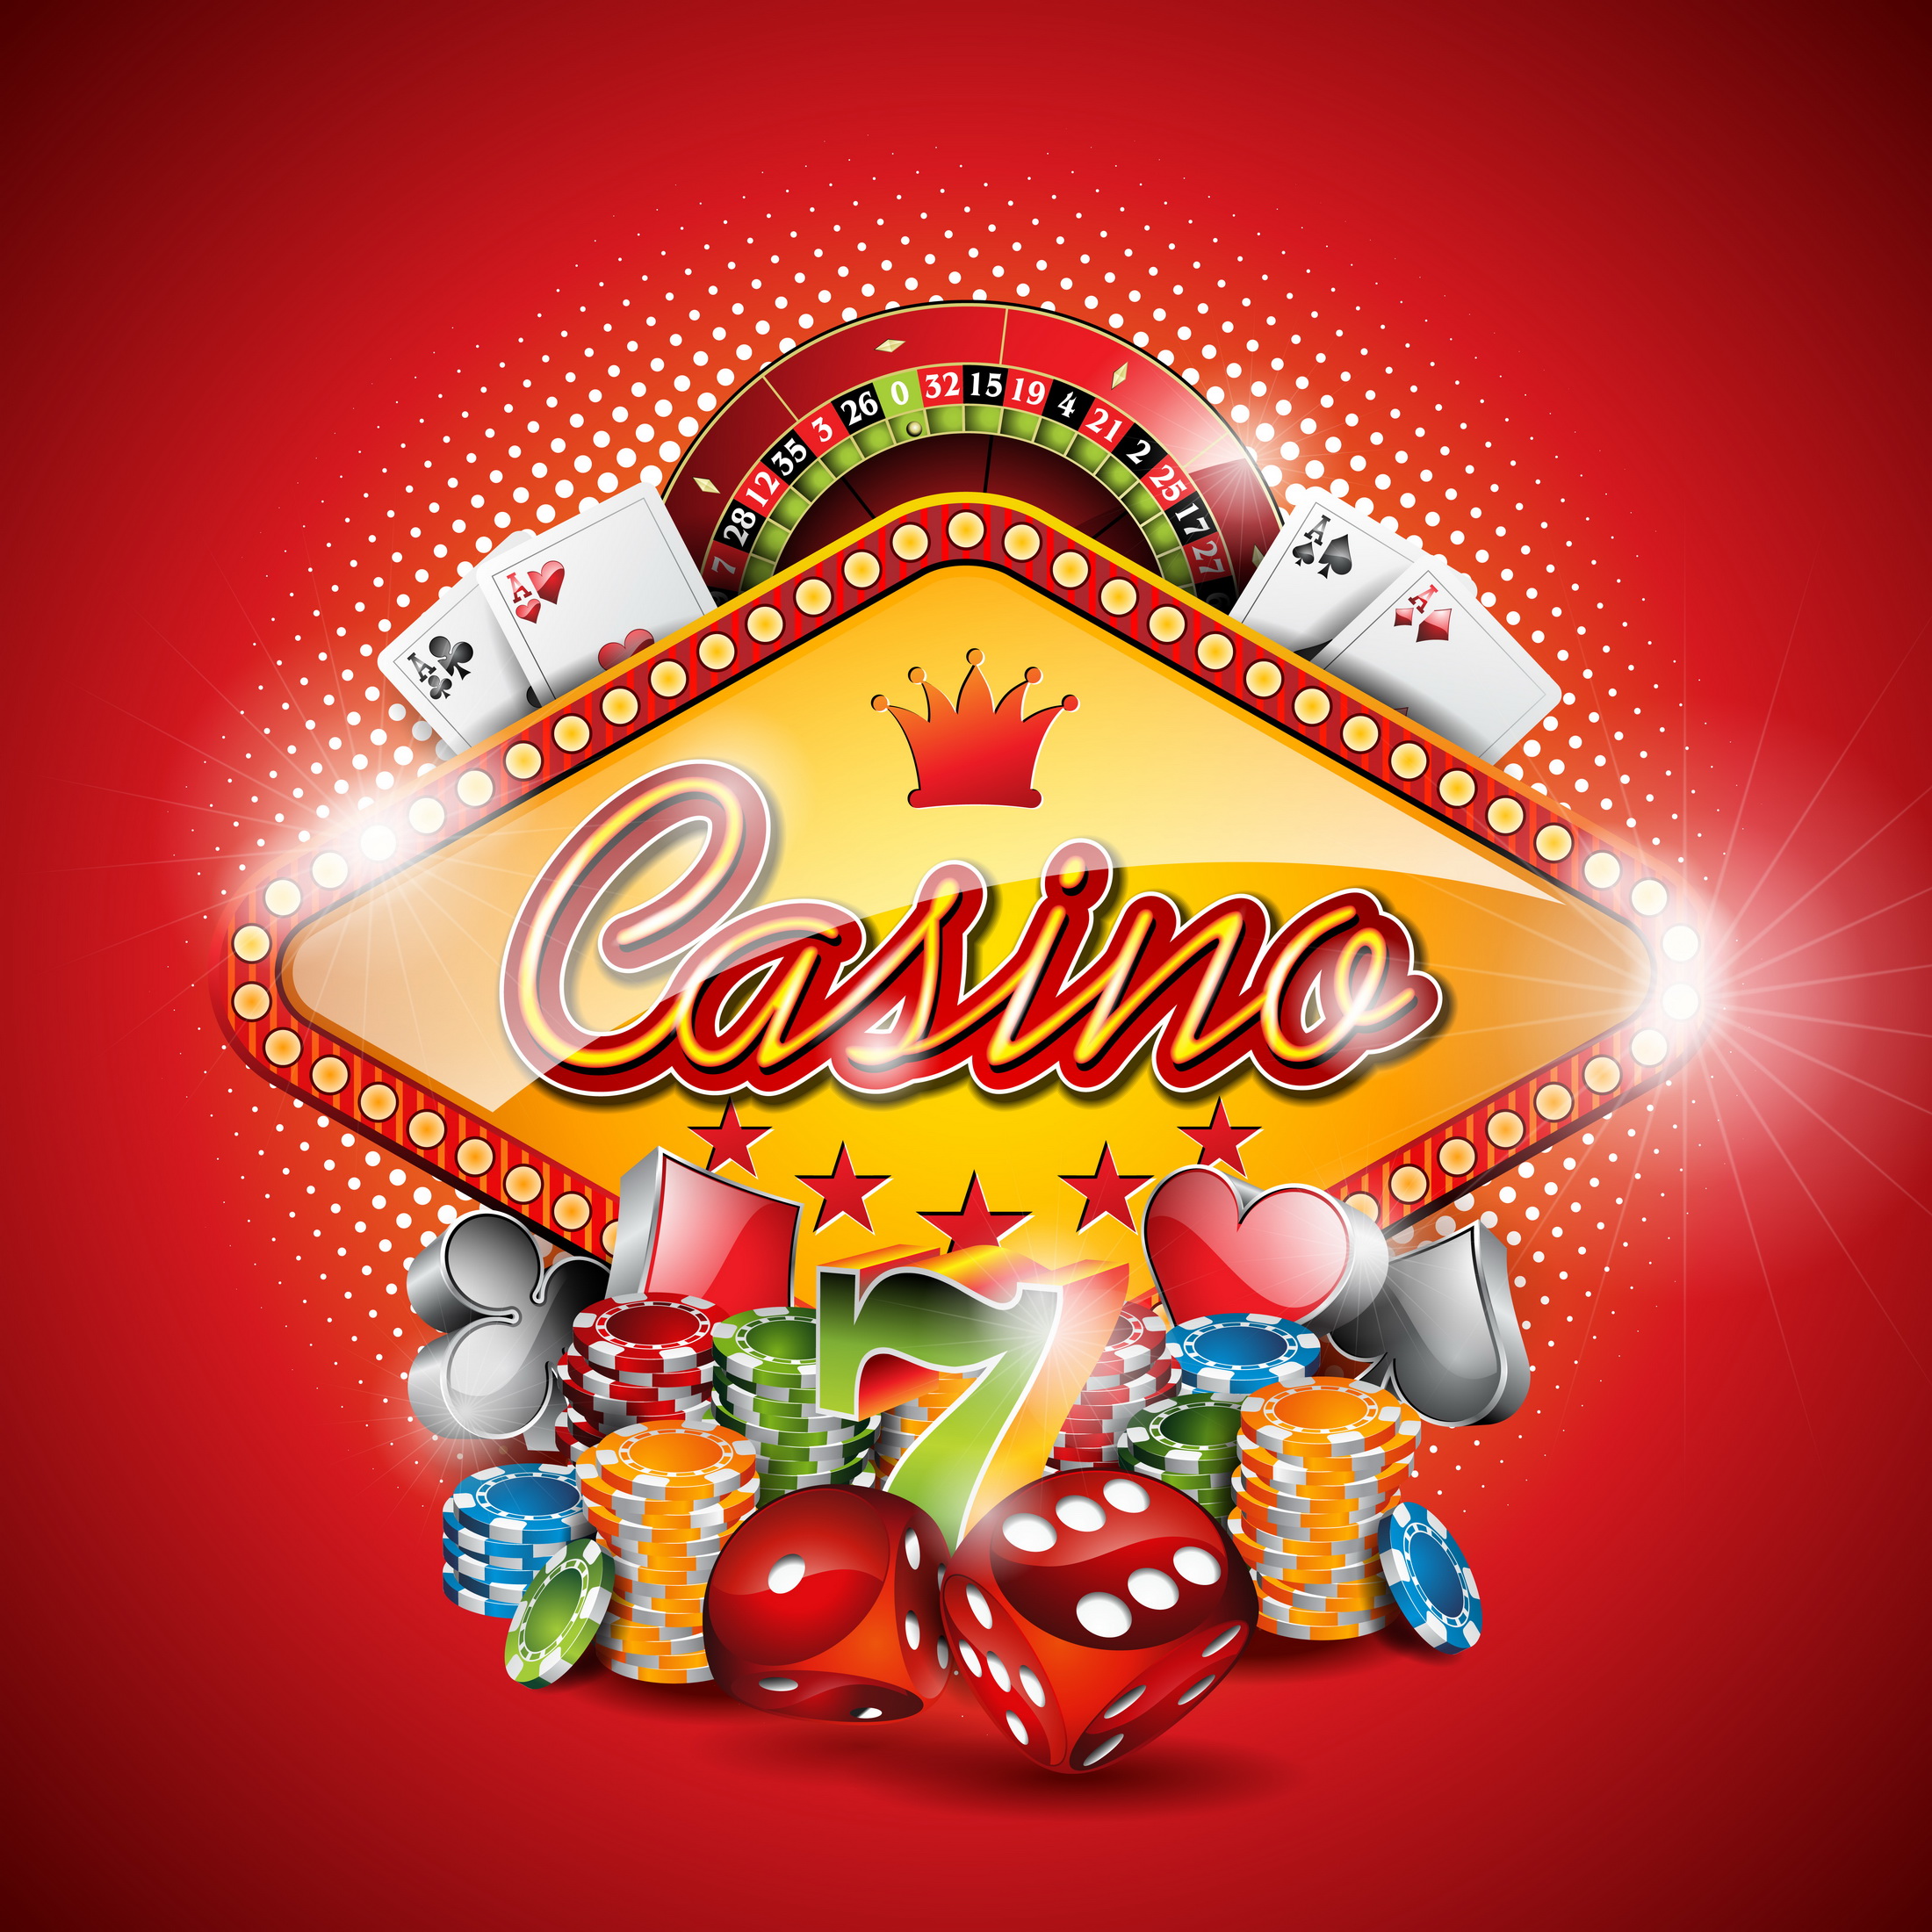 vector-illustration-on-a-casino-theme-with-gambling-elements-on-red-background.jpg